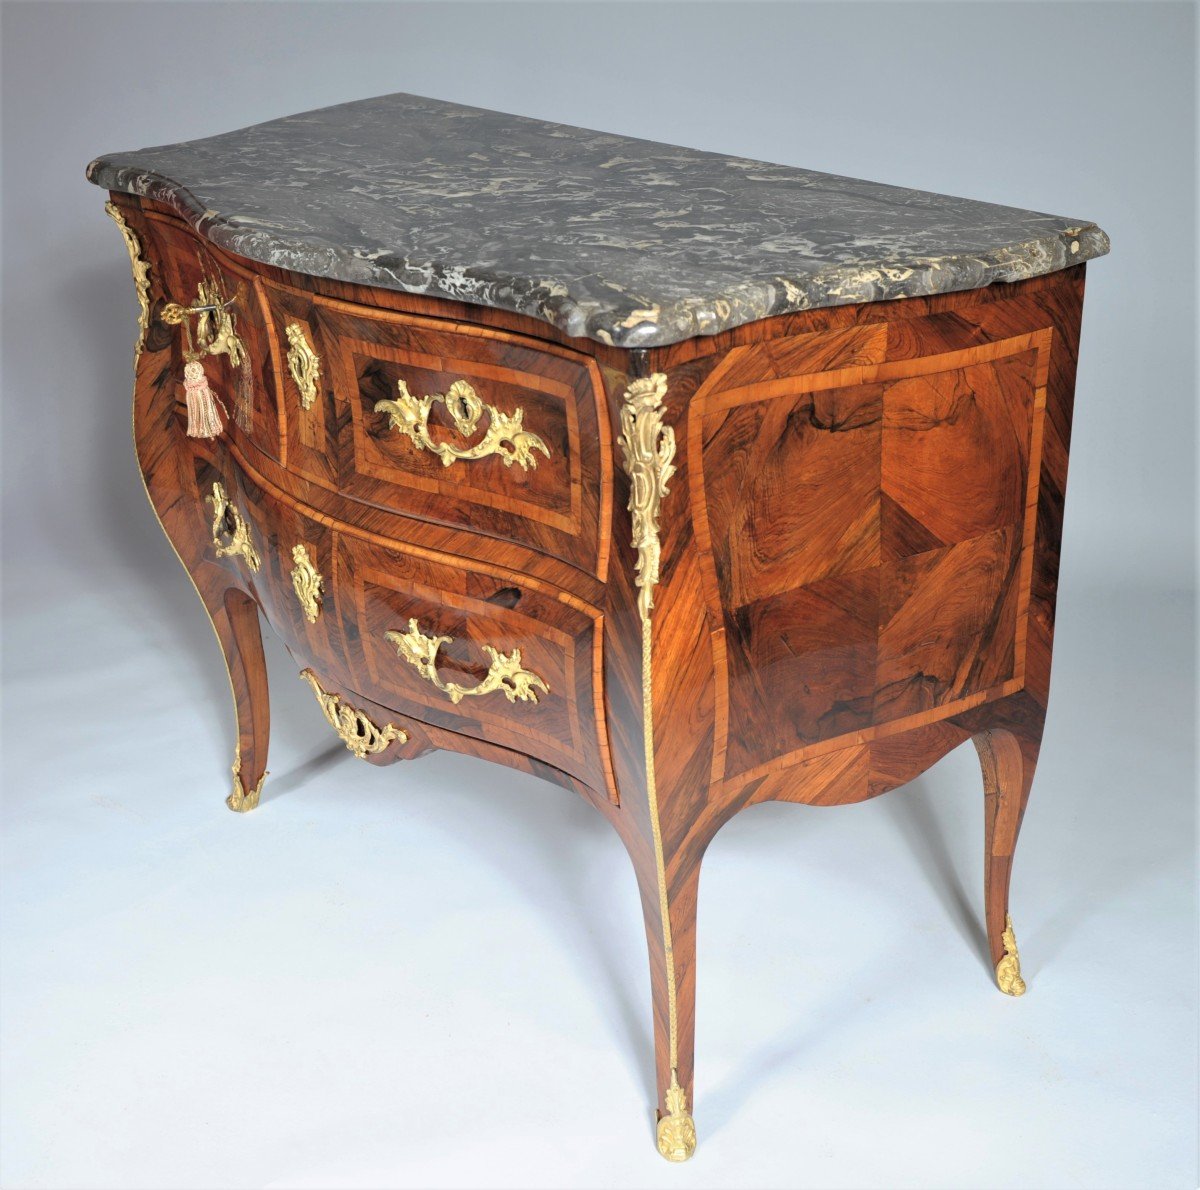 Stamped Jc Ellaume - Superb Chest Of Drawers With Front And Curved Sides - Louis XV Period-photo-2